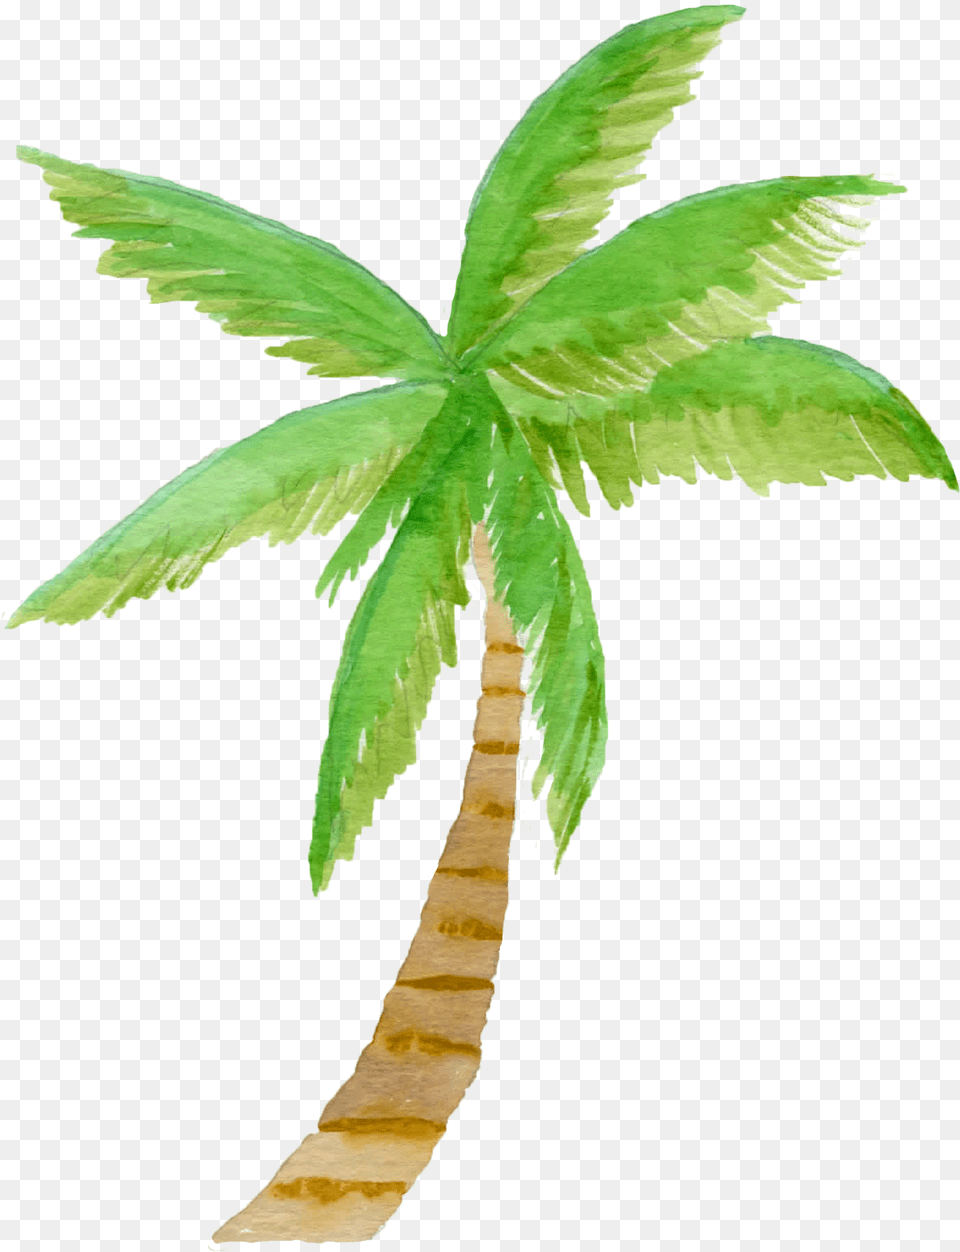 Library Of Watercolor Palm Tree Clip Download Files Watercolor Palm Tree Clipart, Leaf, Palm Tree, Plant Png